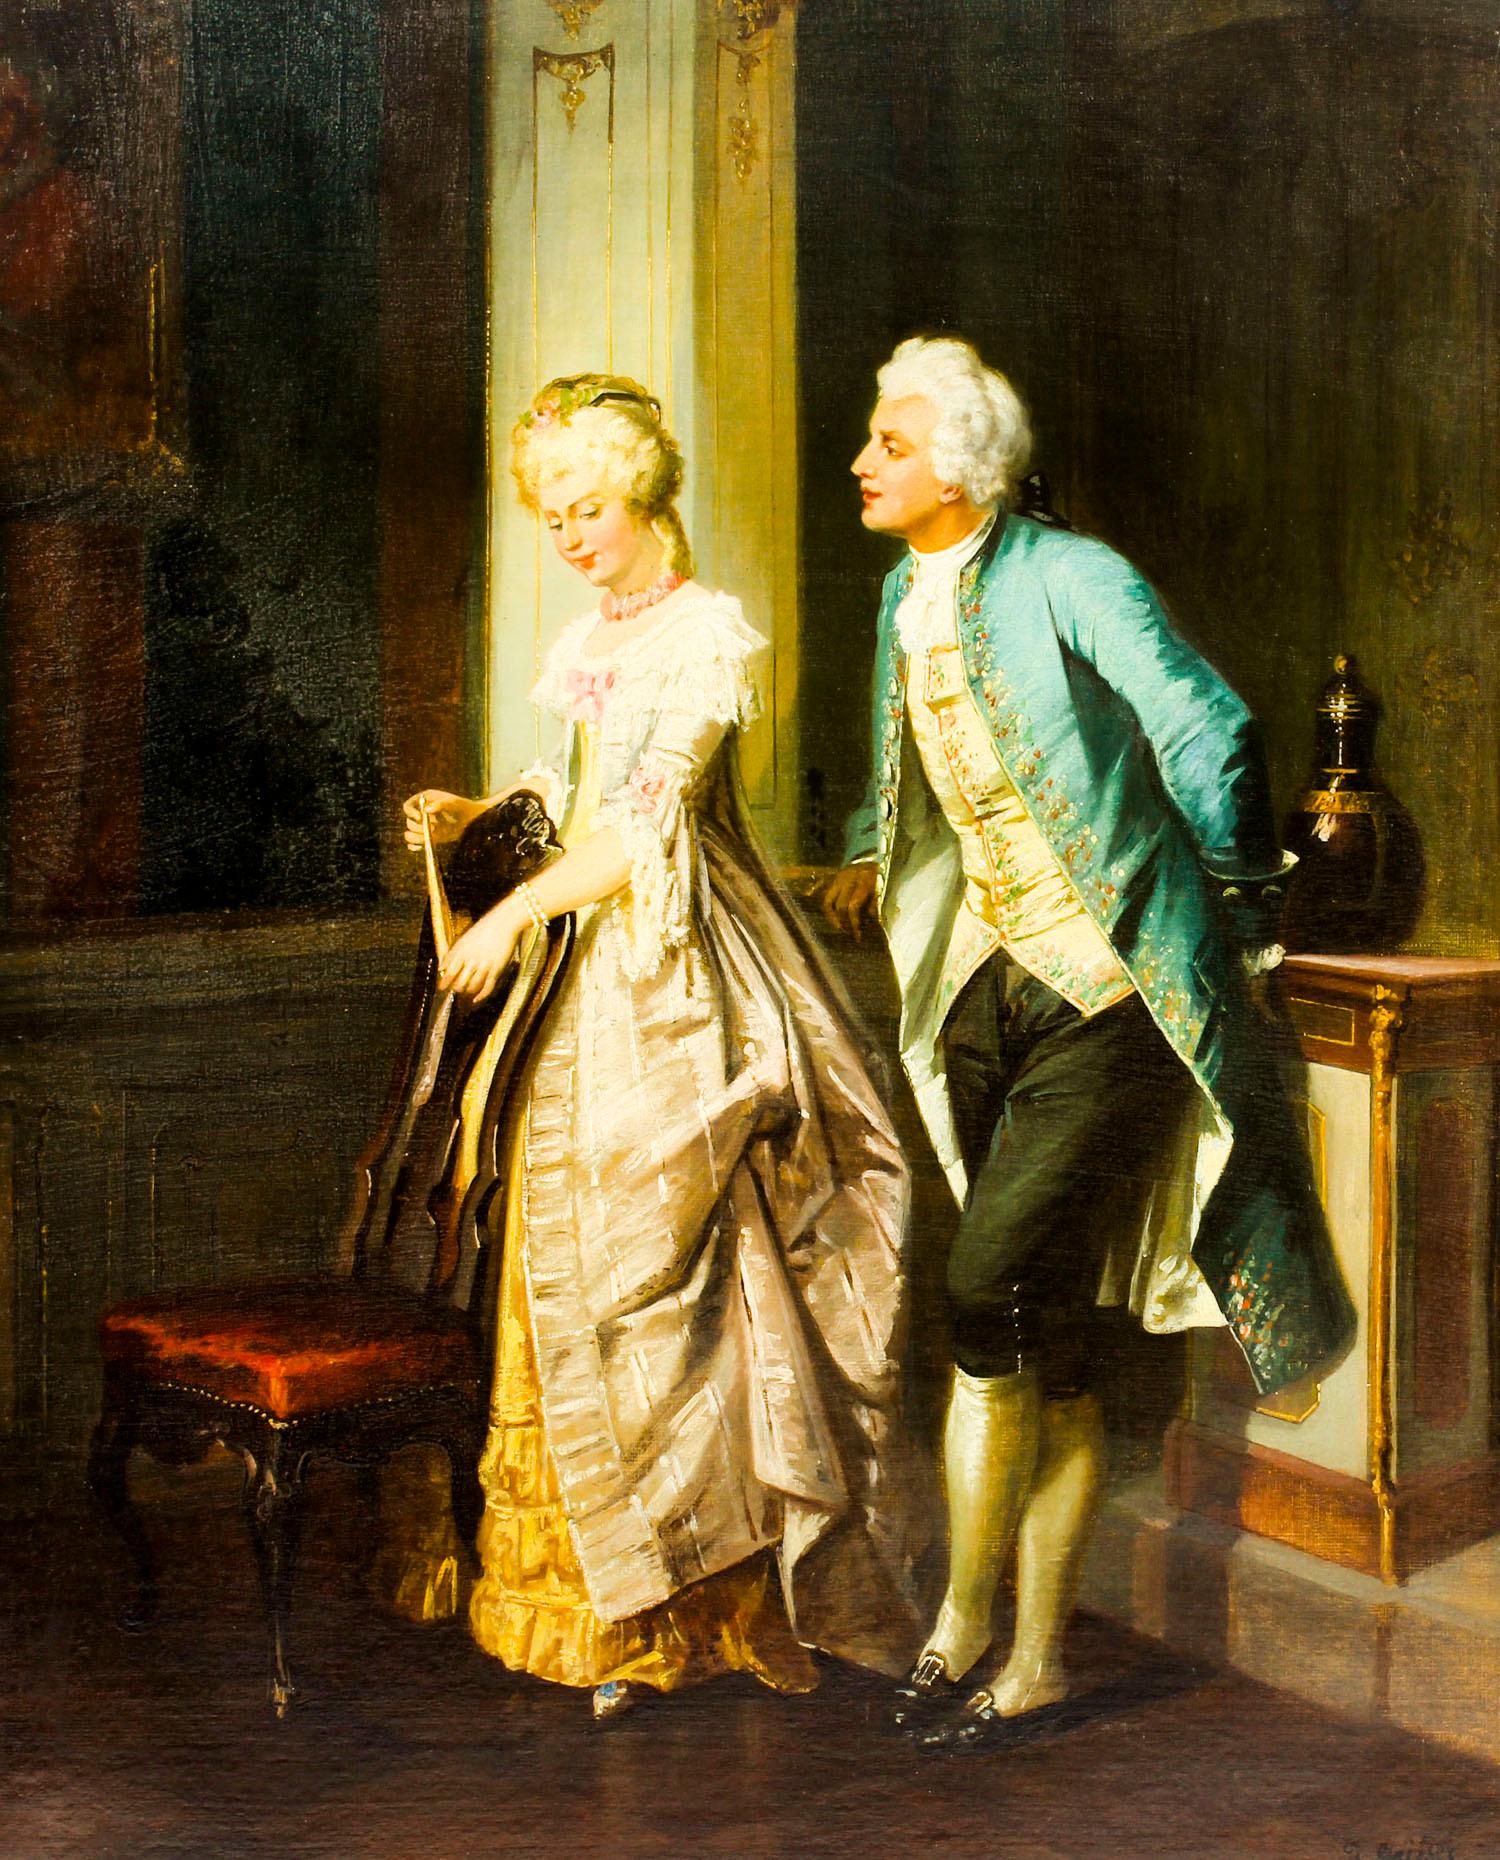 This is a beautiful antique oil on canvas painting by the renowned German artist Jakob Emanuel Gaisser (1825 -1899), mid 19 century in date.

The painting is of a young courting couple dressed in splendid 18th-century attire with an an elegant